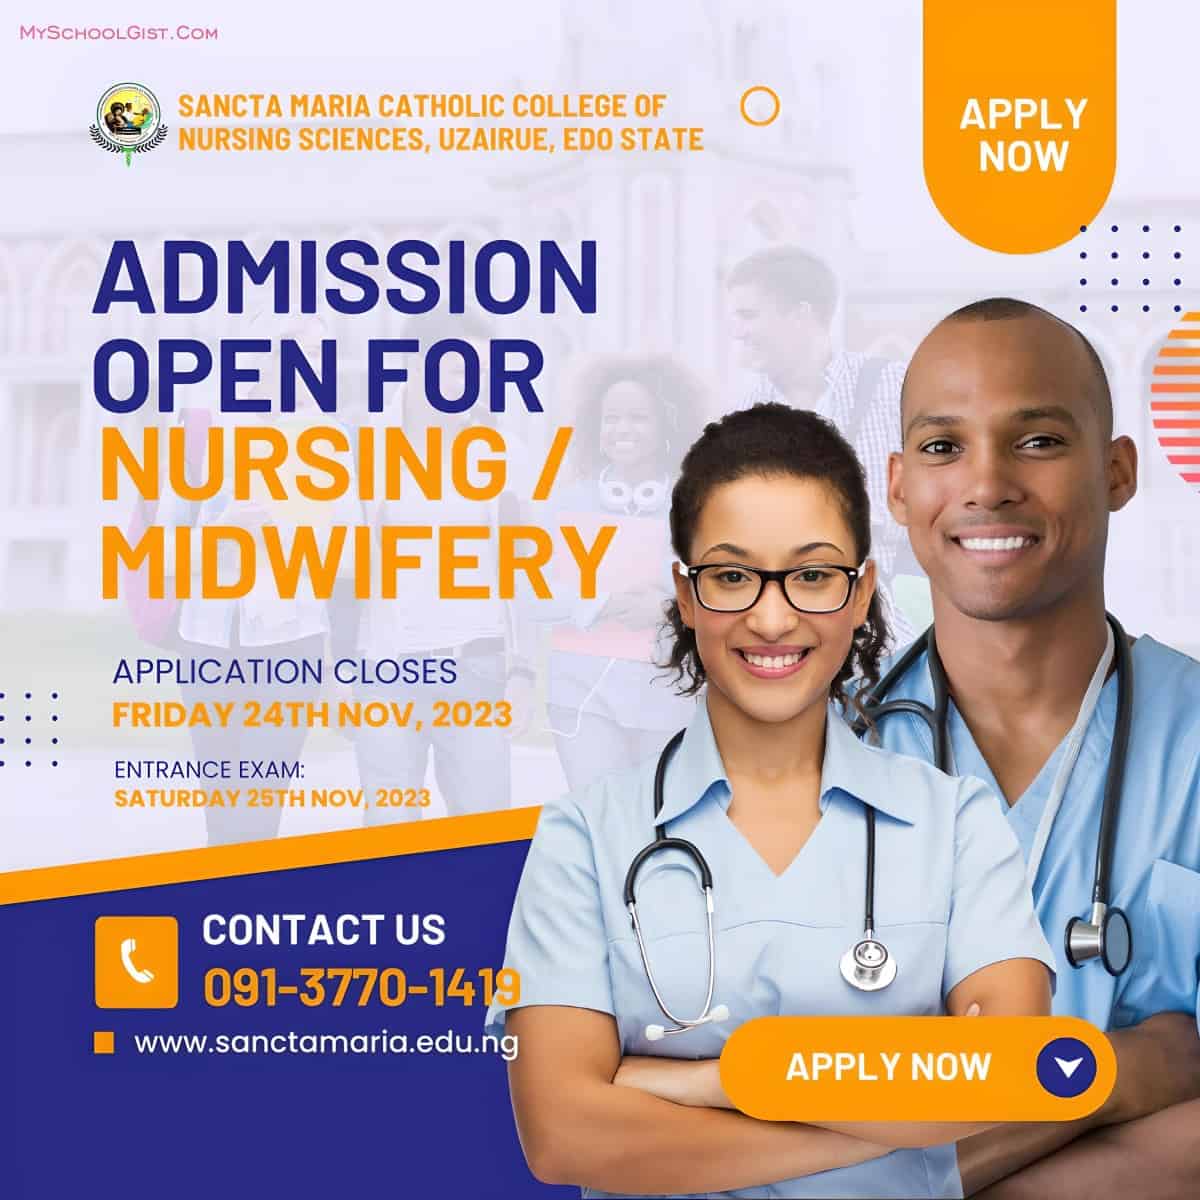 Apply for Sancta Maria Catholic College of Nursing Sciences Admission form for the 2023-2024 academic session